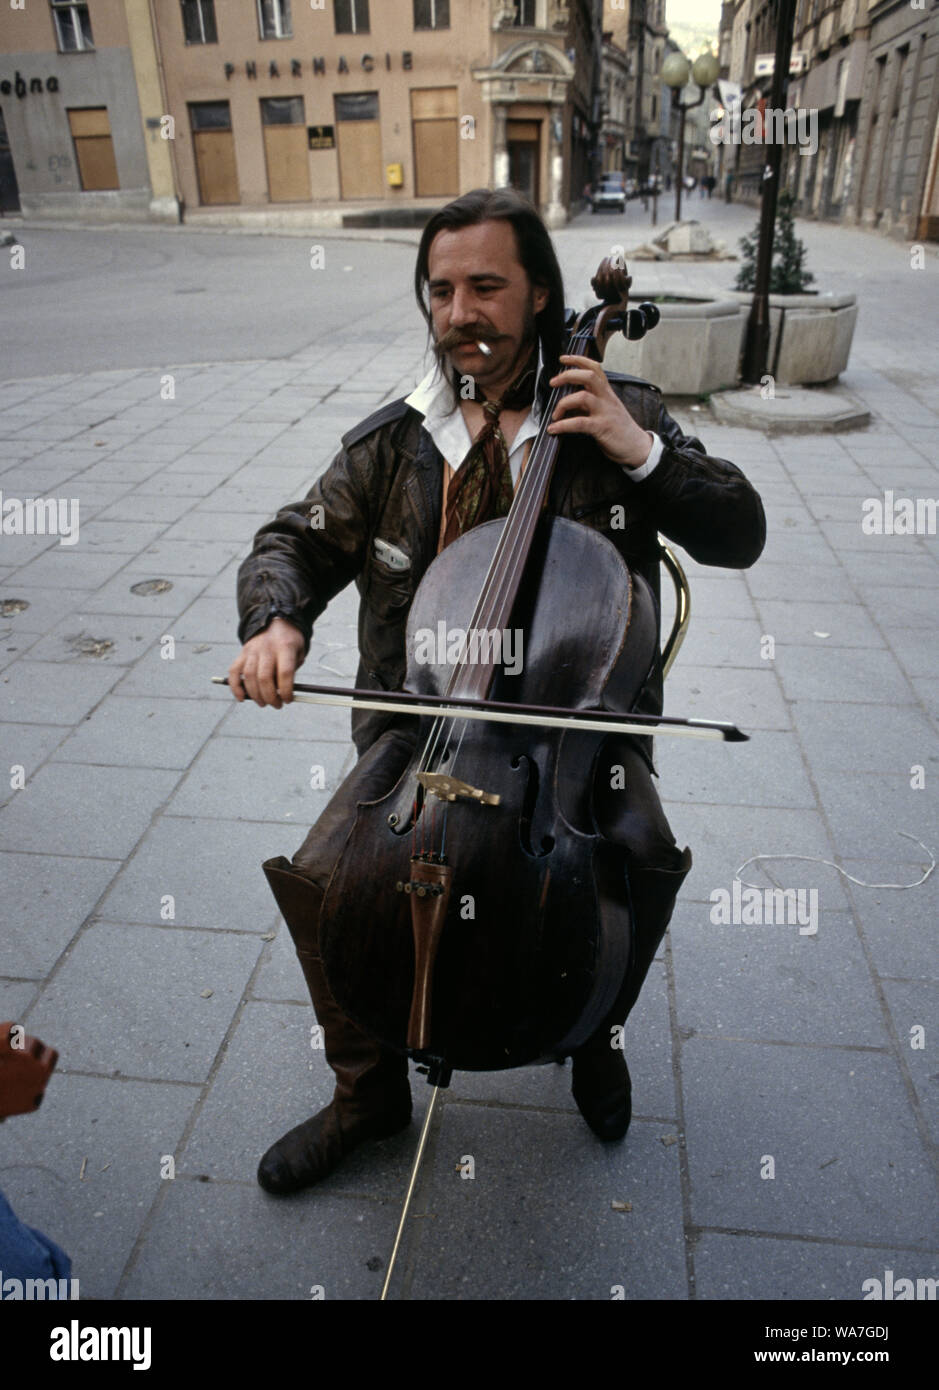 11th May 1993 During the Siege of Sarajevo: the "cellist of Sarajevo", Vedran Smailović, performs in Fra Grge Martica Square. Stock Photo